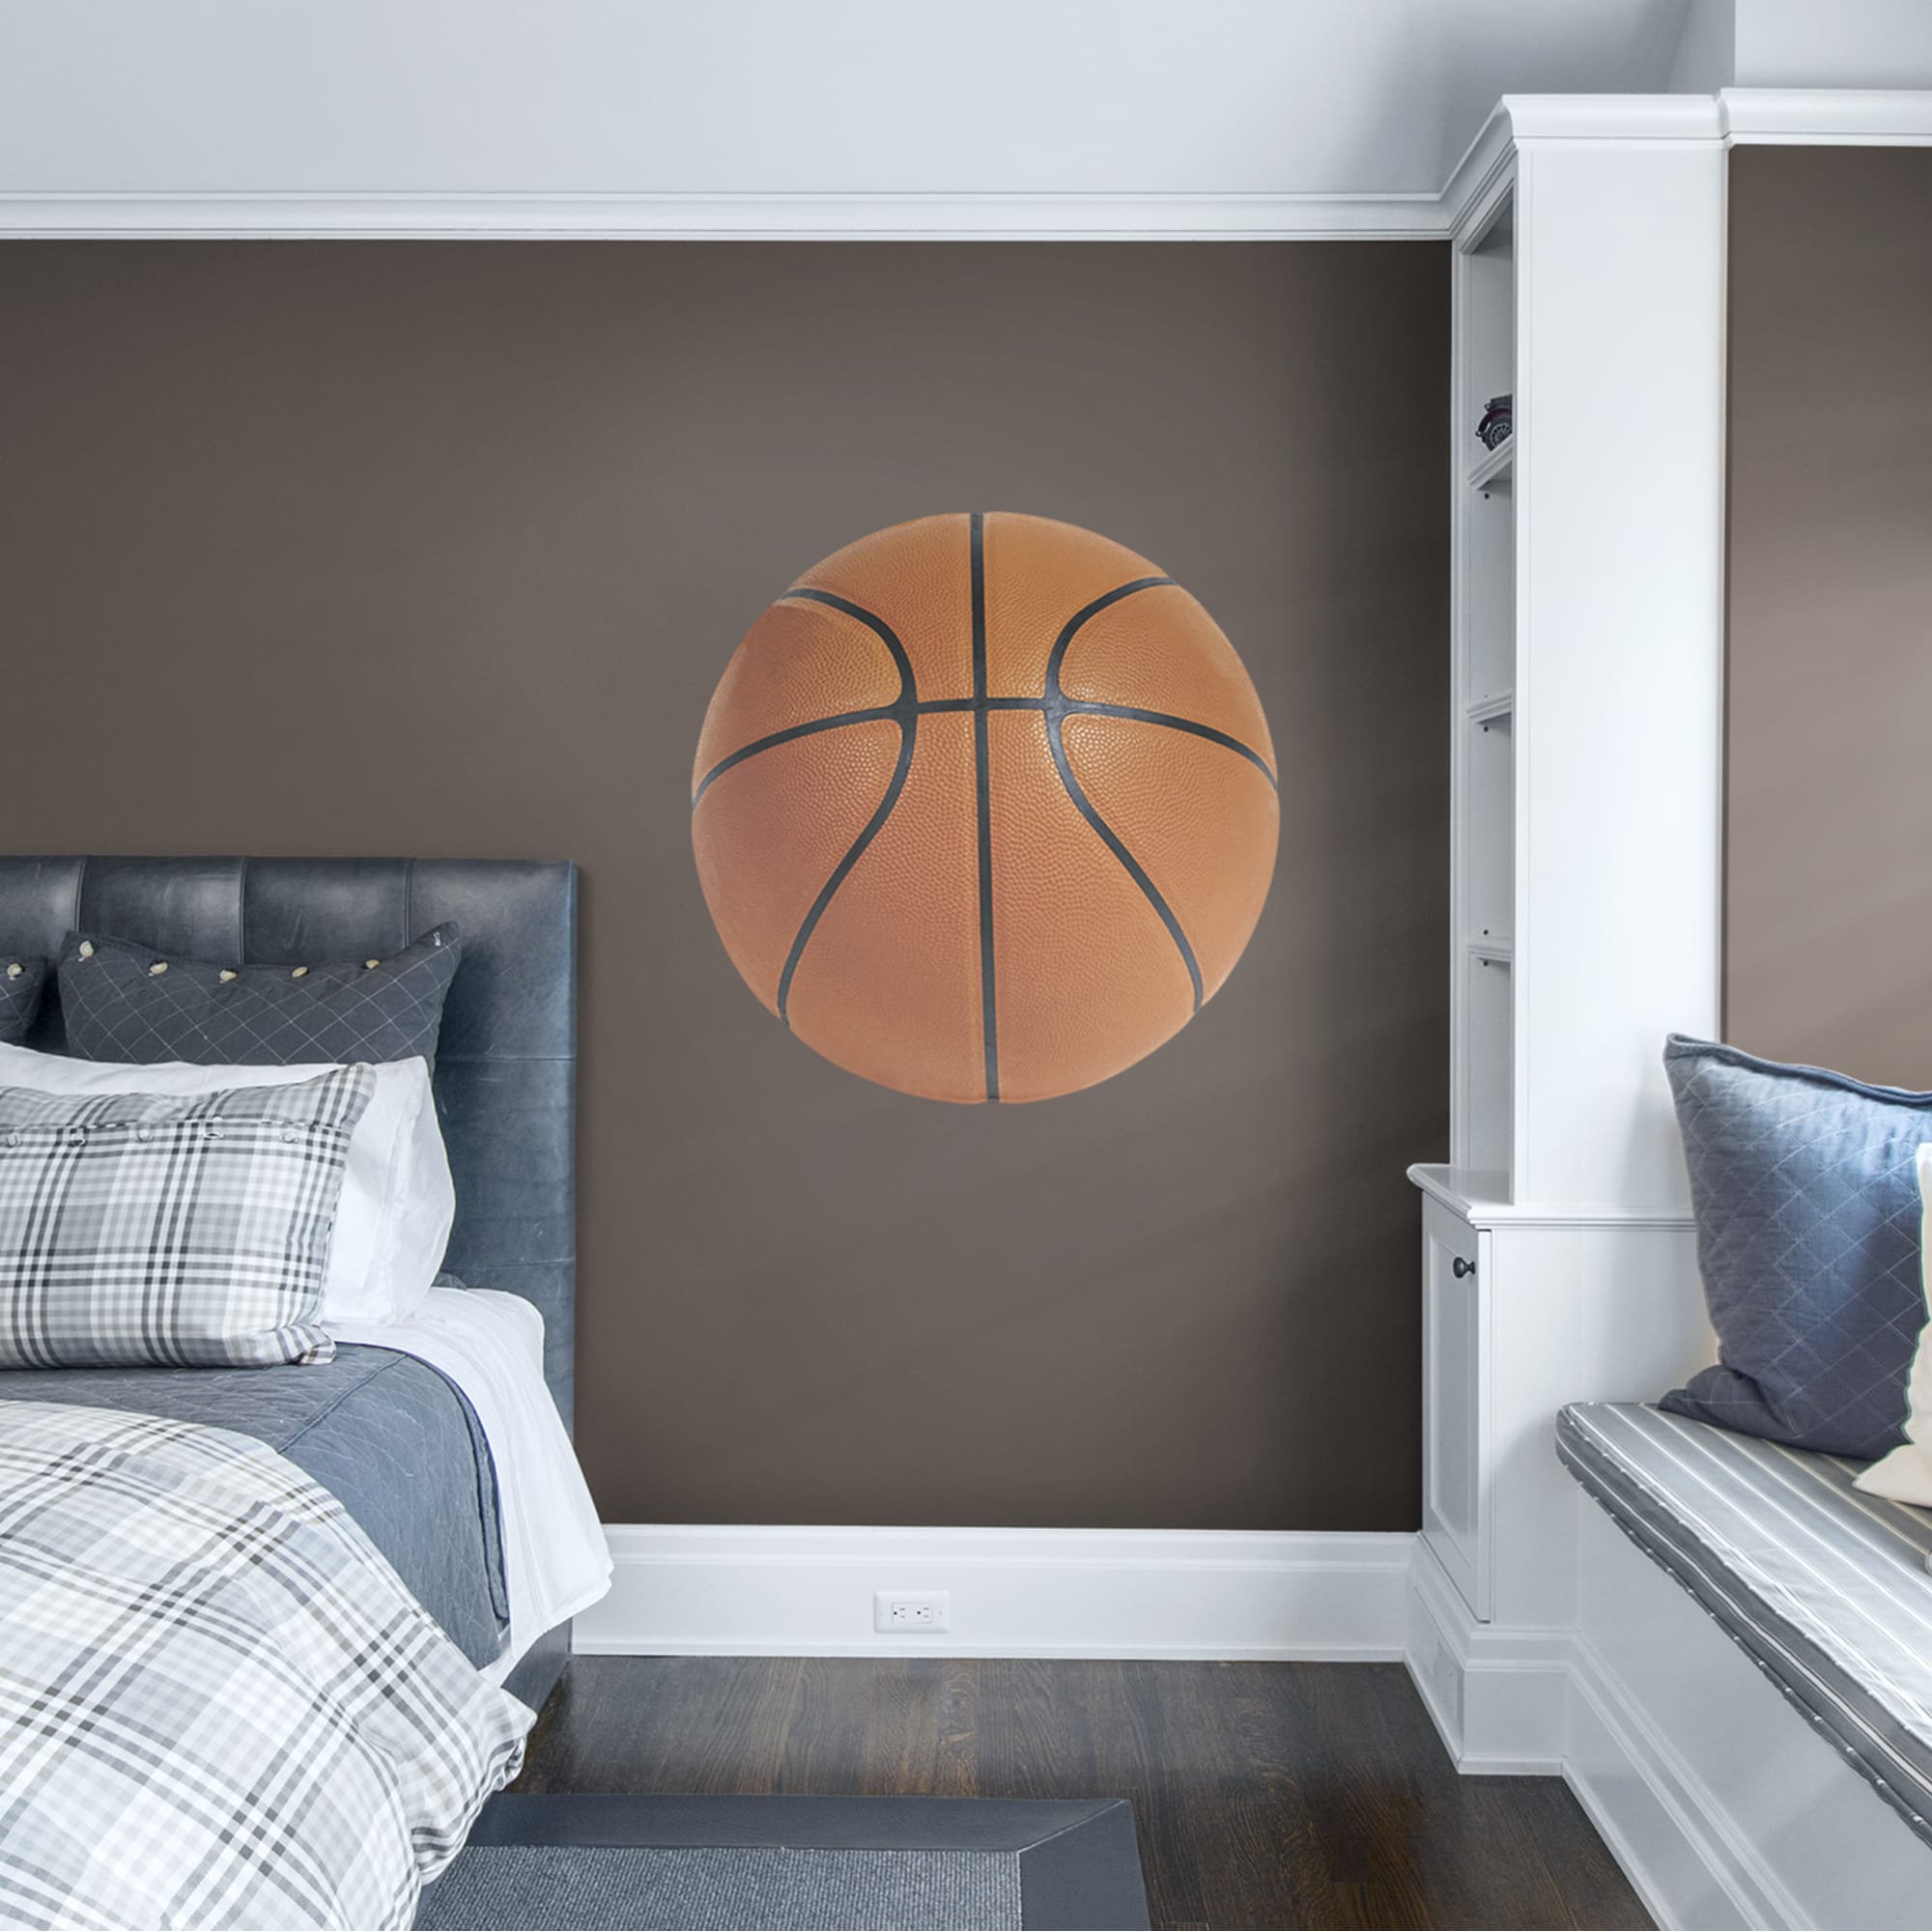 Basketball: Assorted Graphics - Removable Vinyl Decal 38.0"W x 38.0"H by Fathead